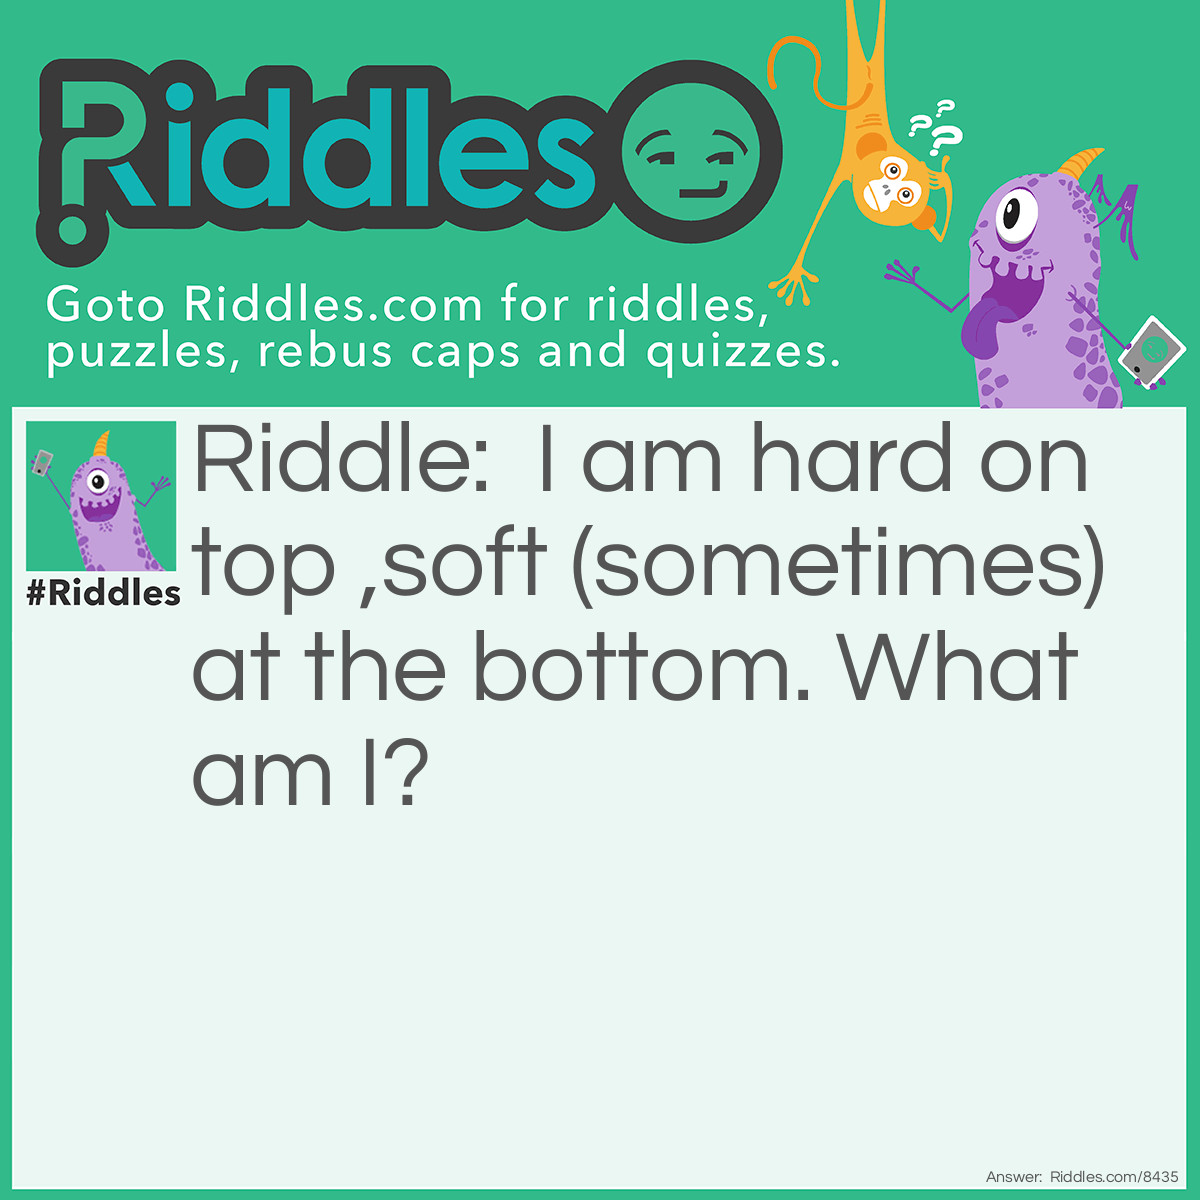 Riddle: I am hard on top ,soft (sometimes) at the bottom. What am I? Answer: A Turtle.